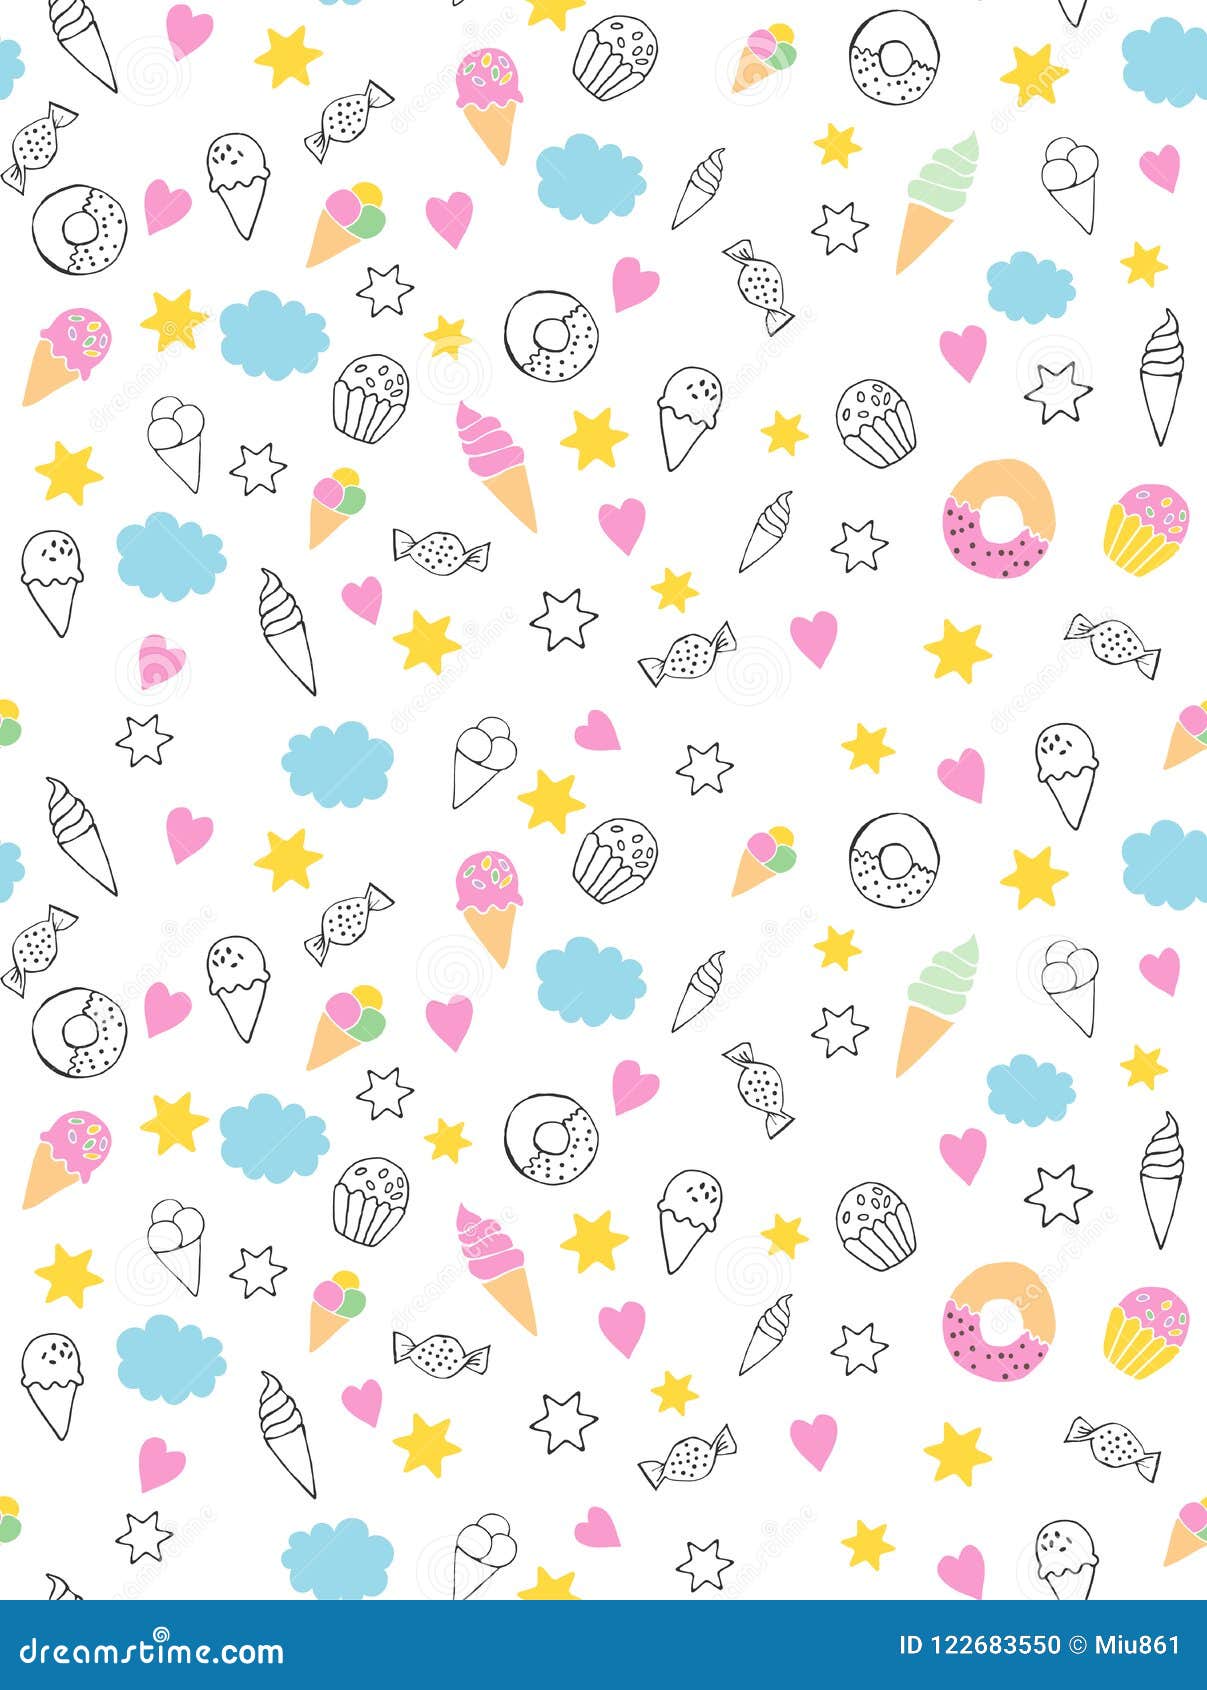 cute hand drawn sweets n pattern. candies, ice creams, muffins, donuts. white background. pink hearts and yellow stars. infa